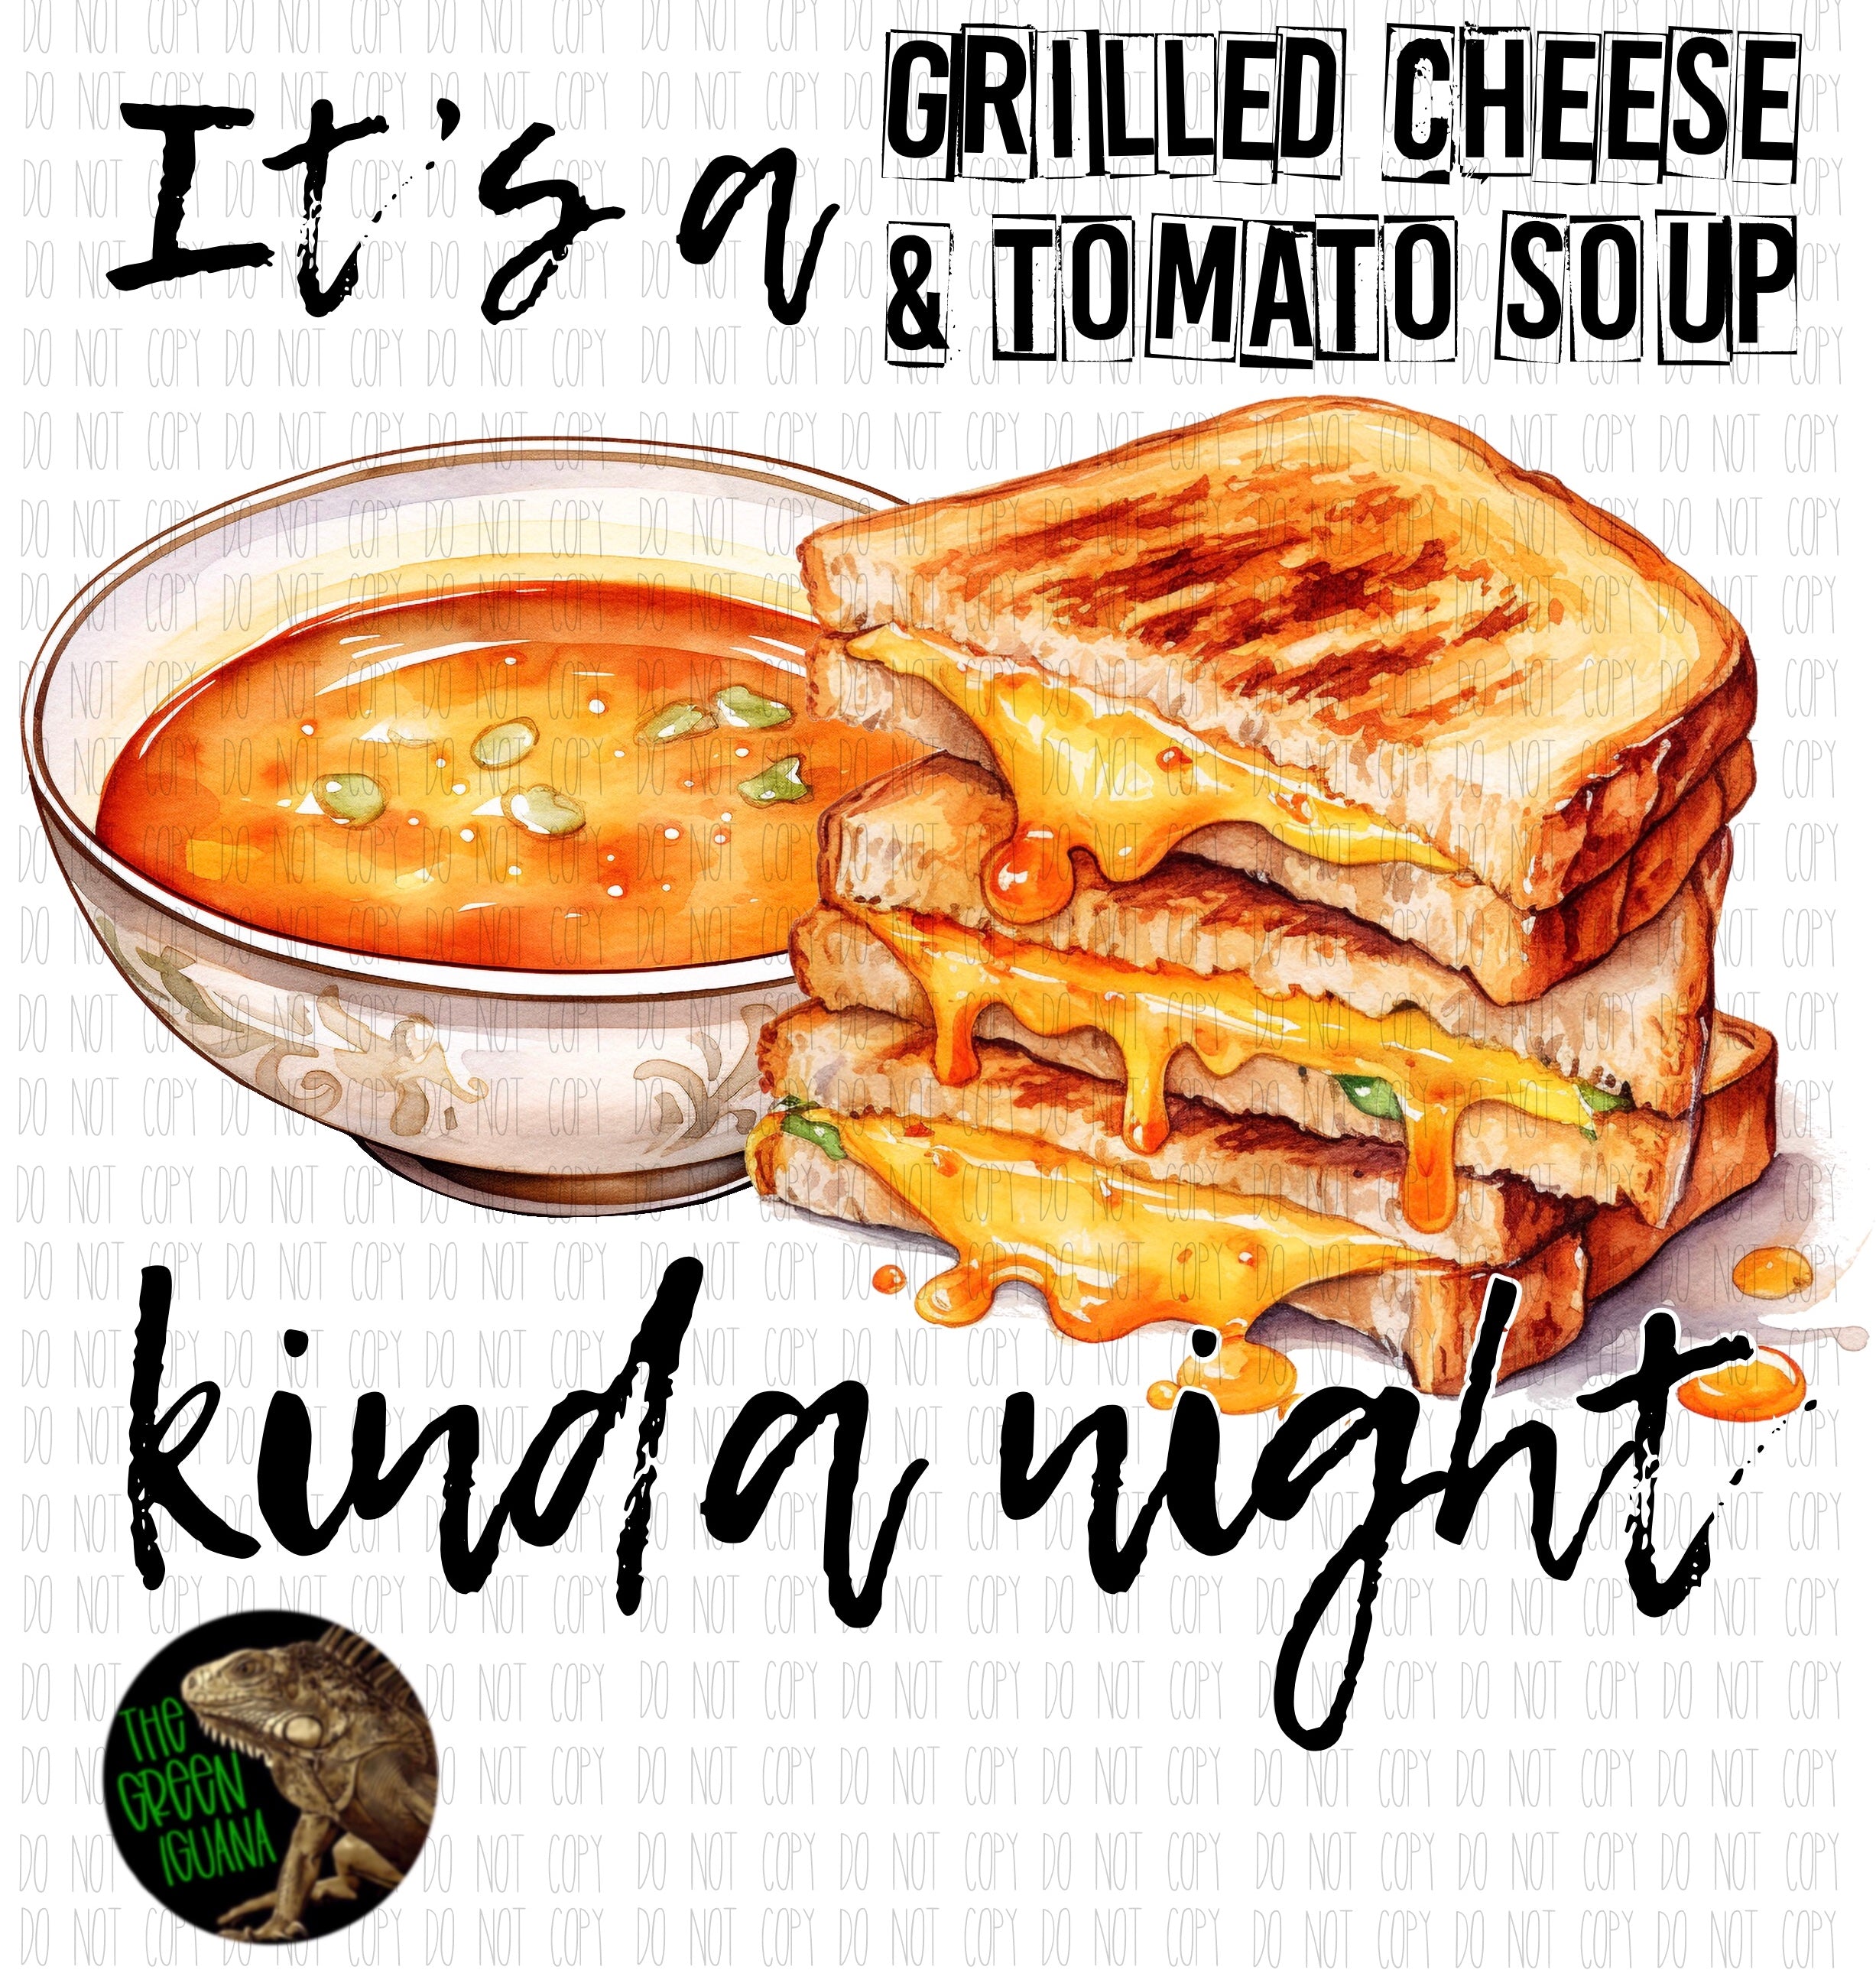 It’s a grilled cheese & tomato soup kinda night - DIGITAL